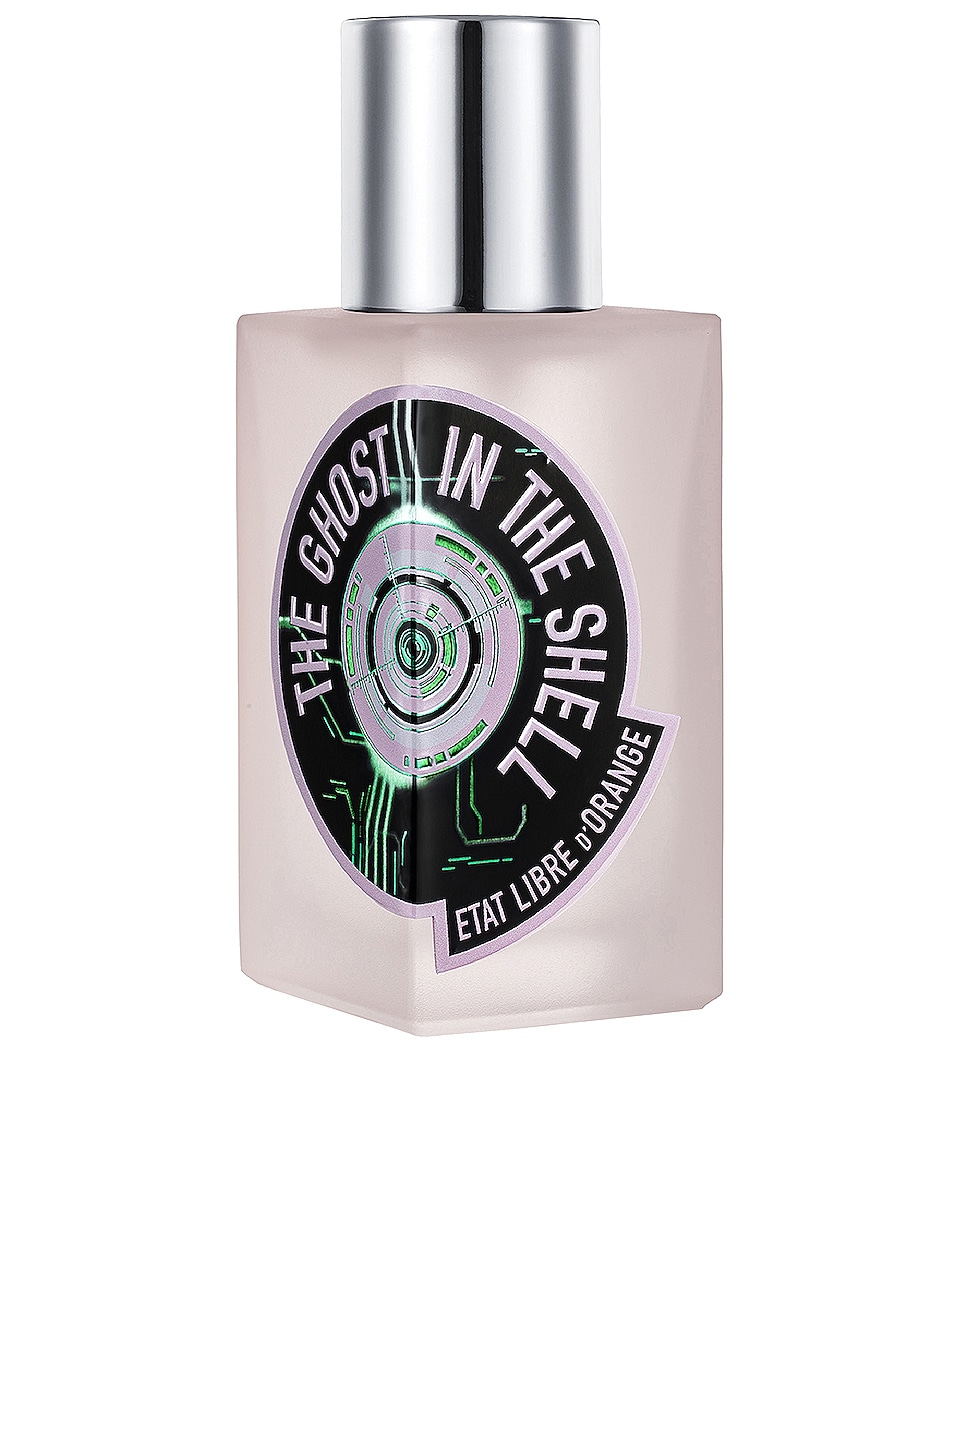 Image 1 of The Ghost In The Shell Eau de Parfum